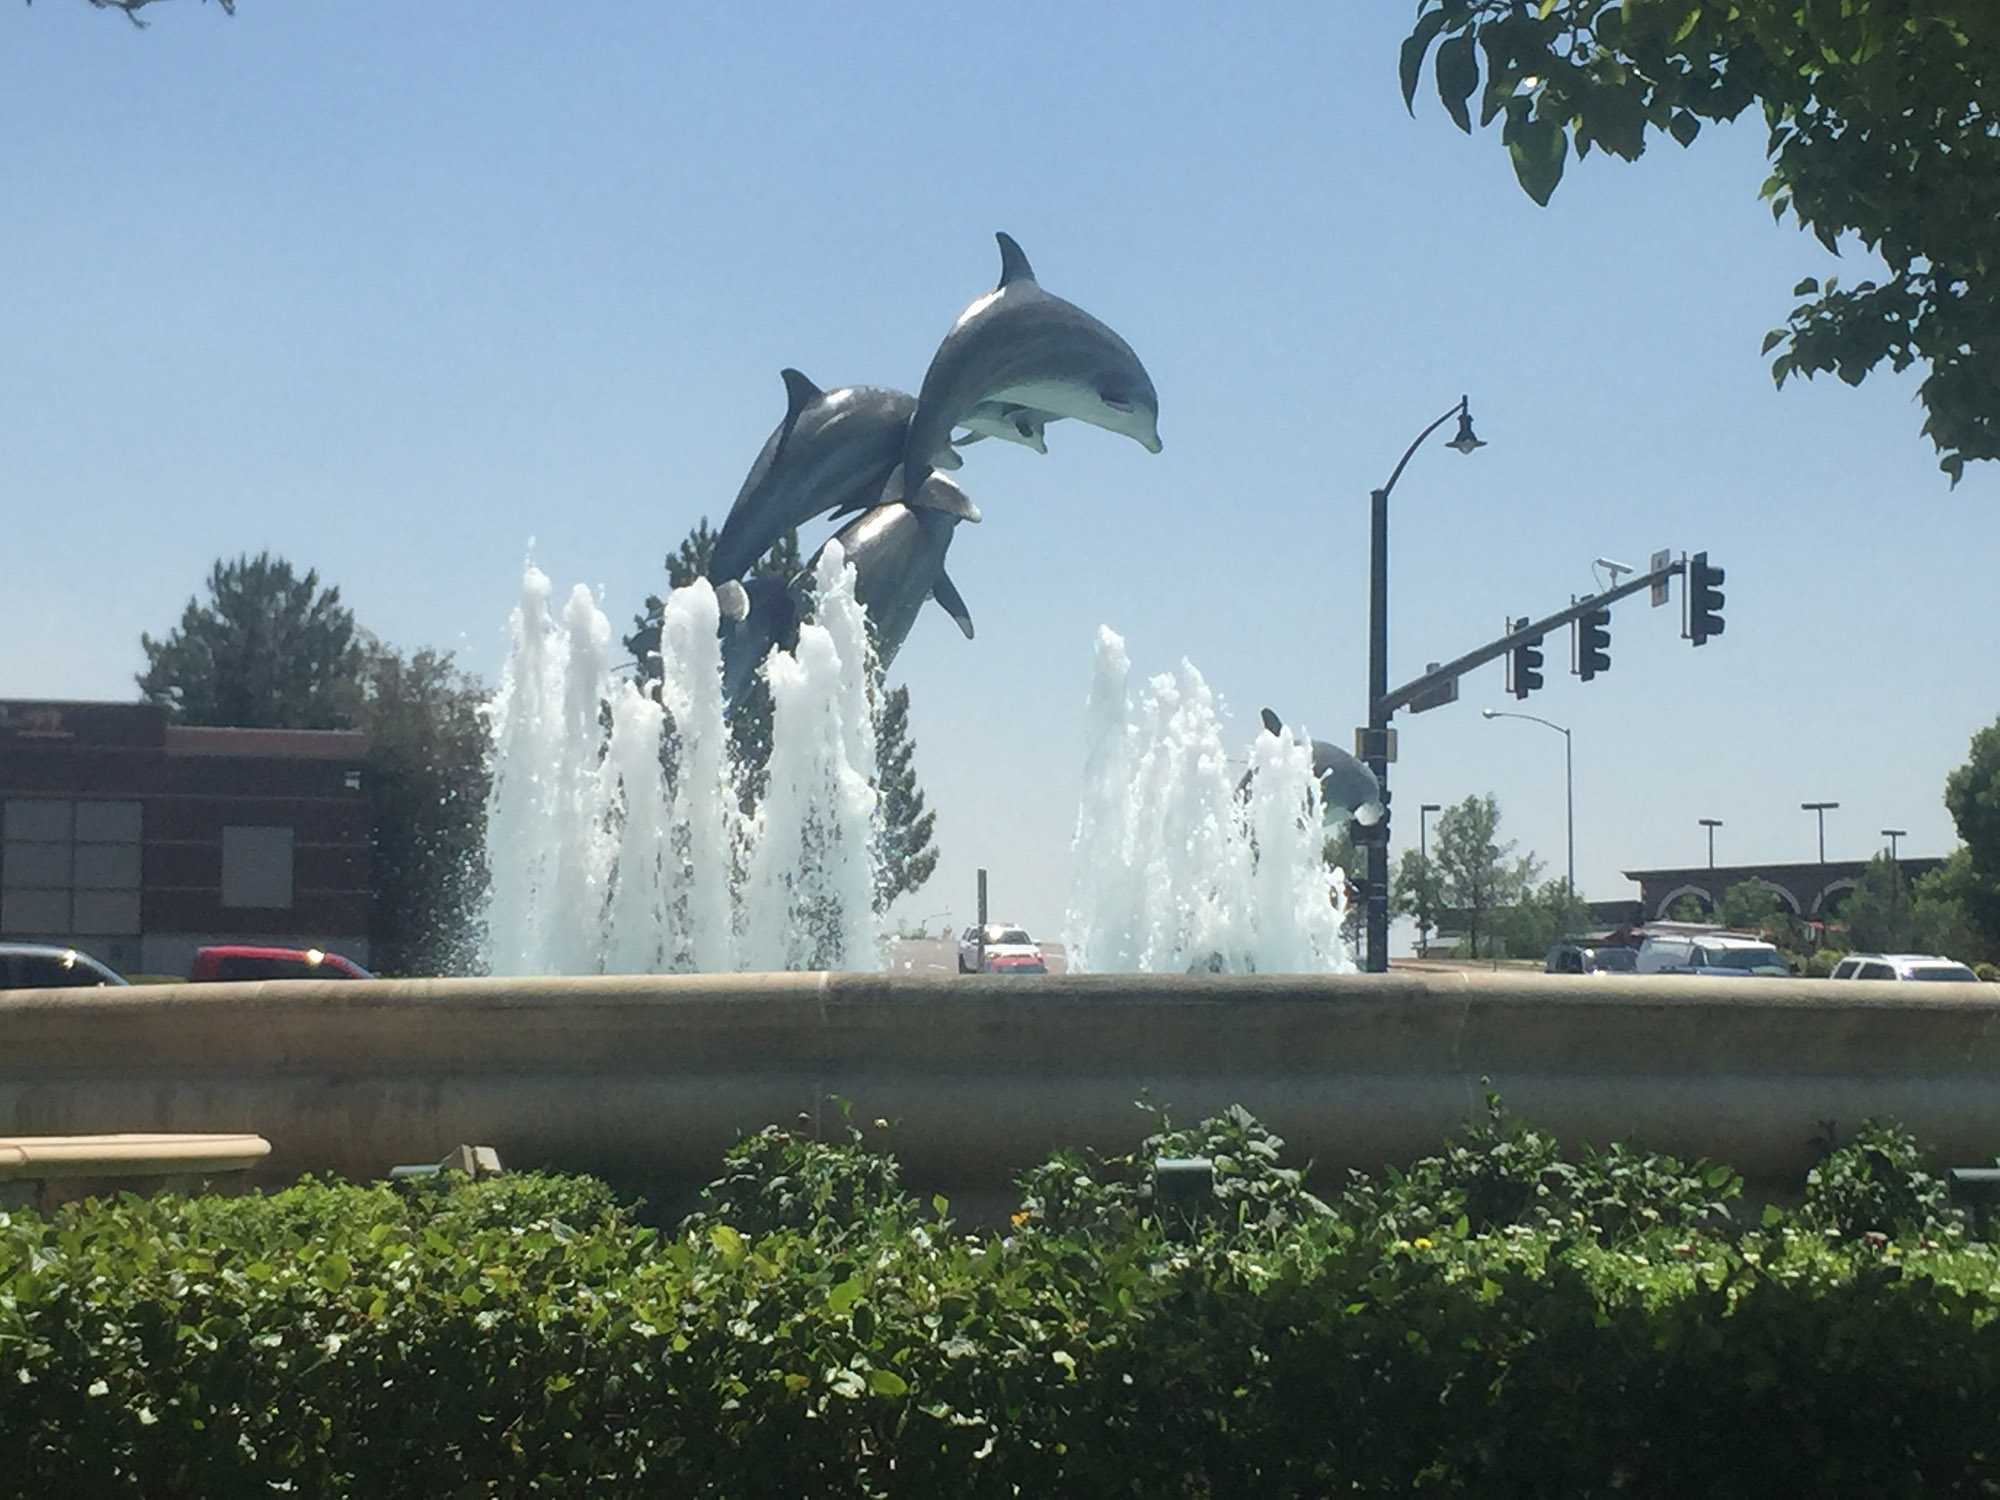 Jumping Dolphins over Spraying Water